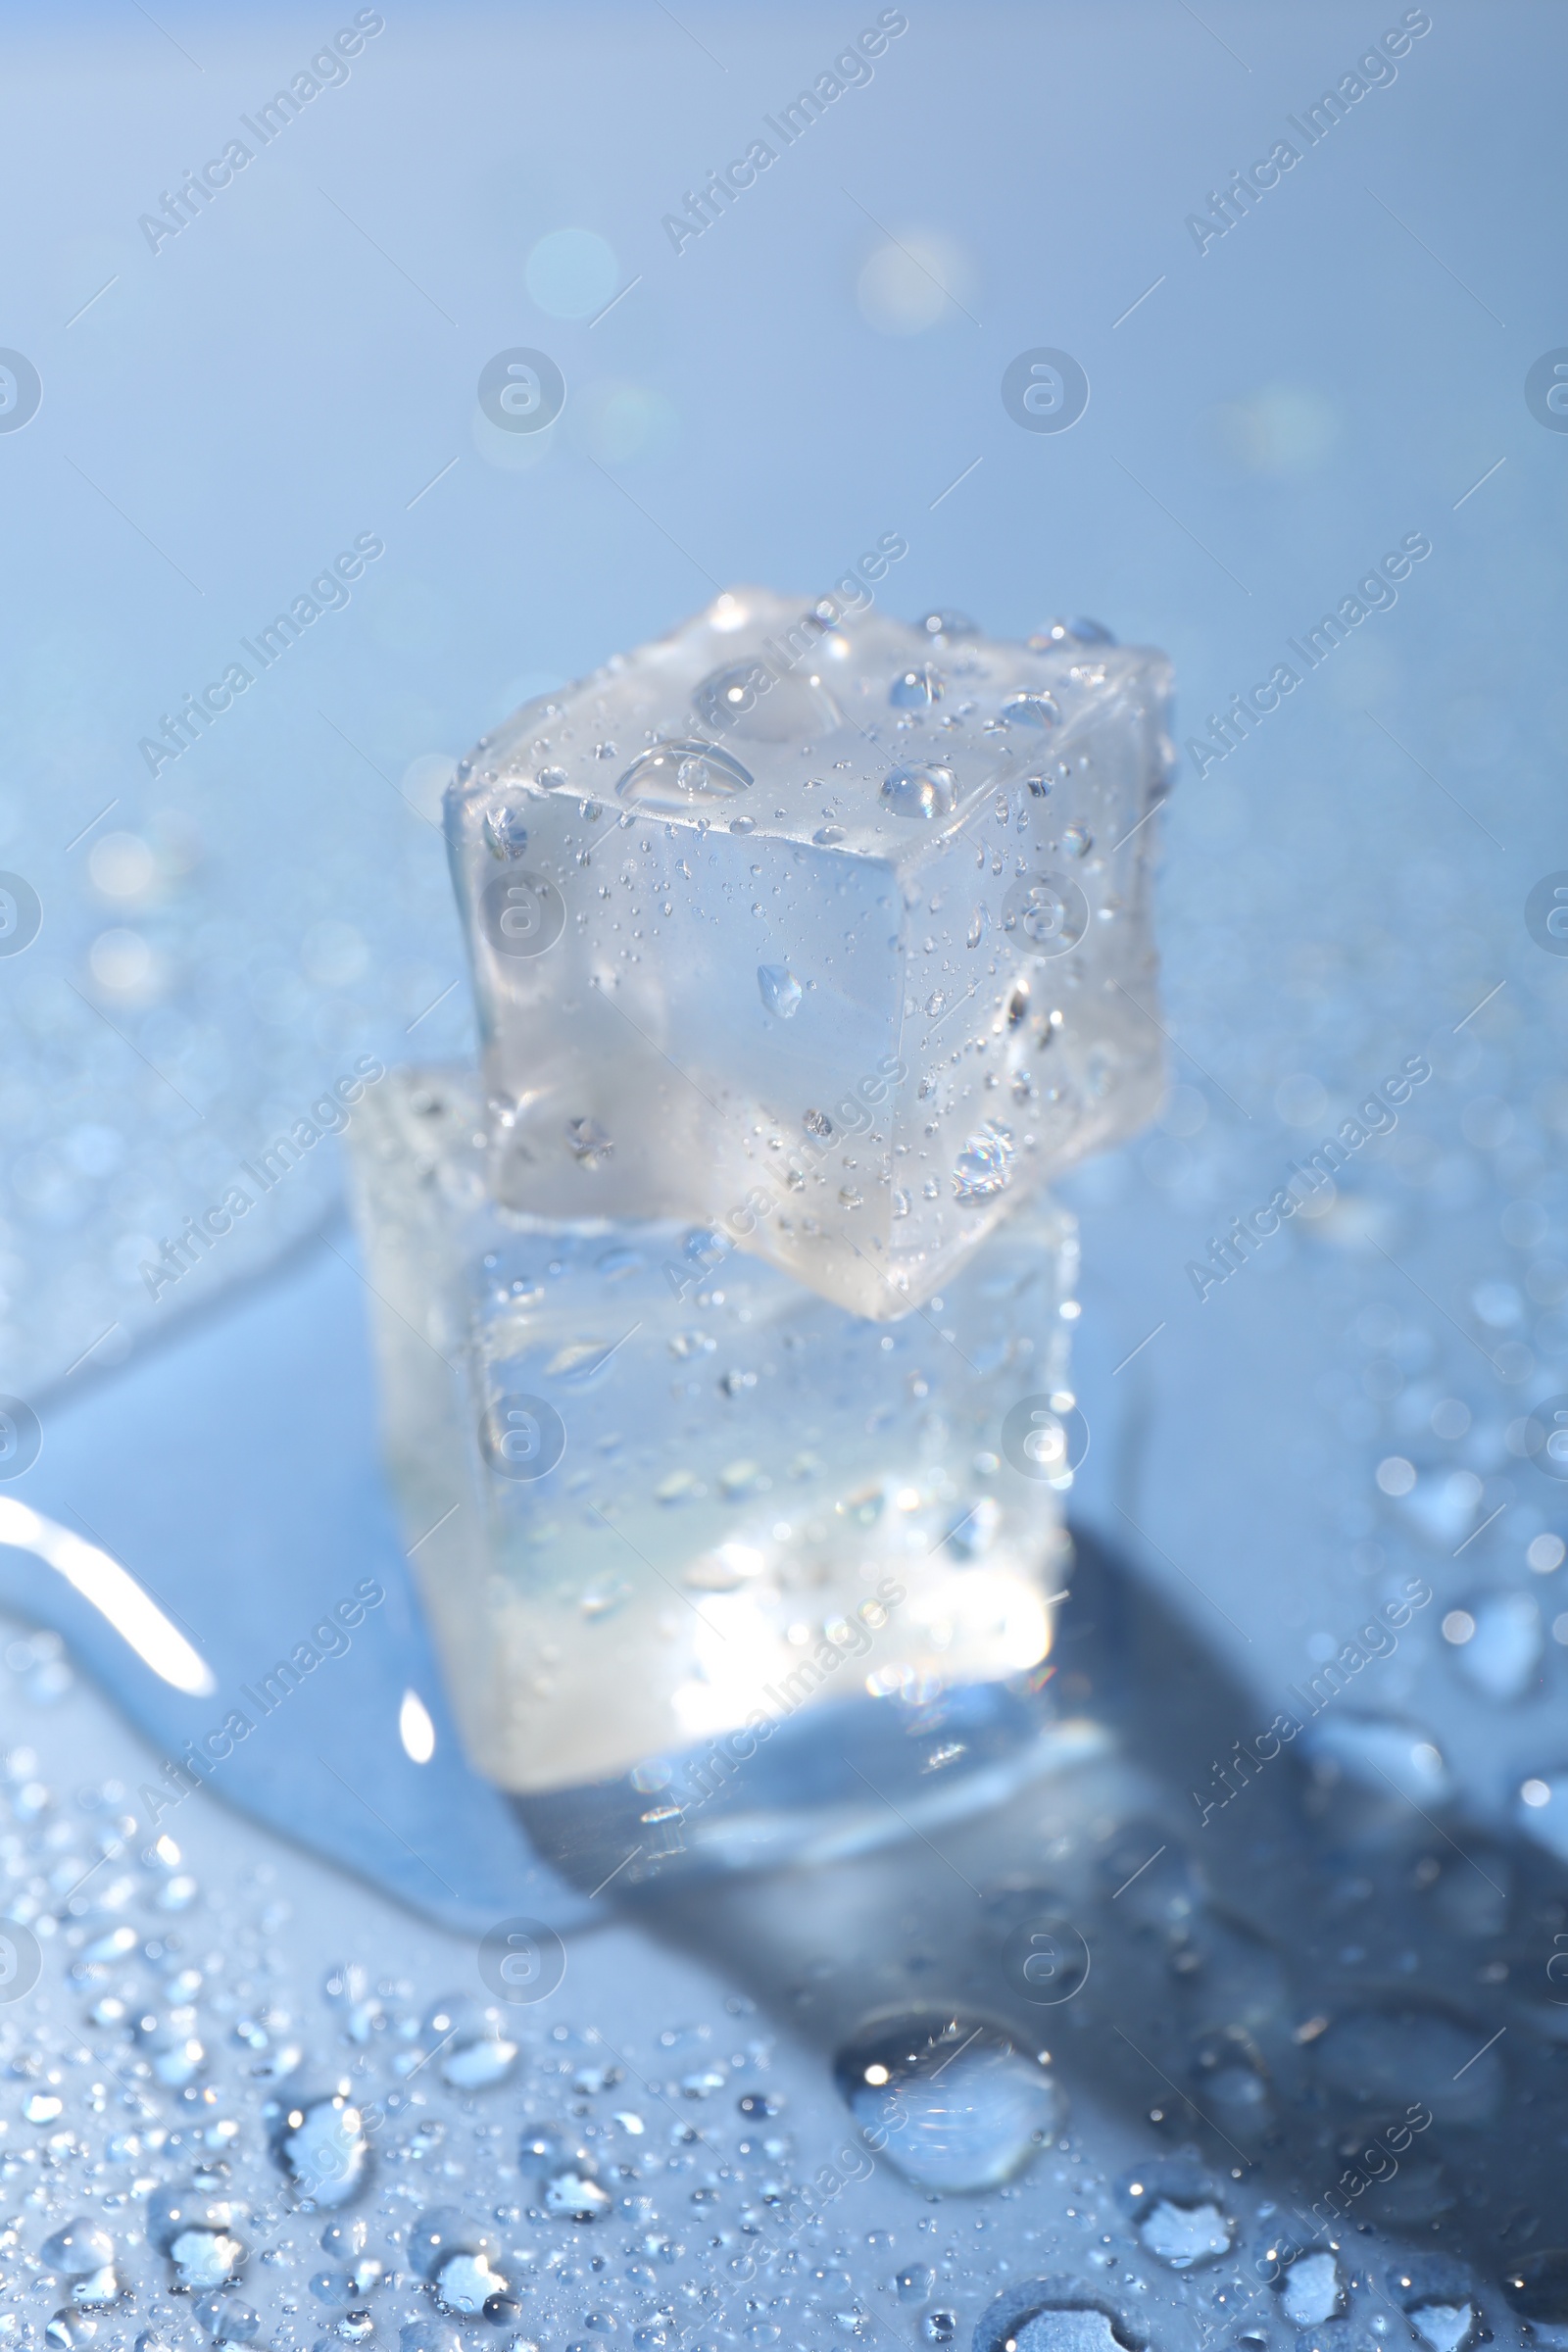 Photo of Melting ice cubes and water drops on light blue background, closeup